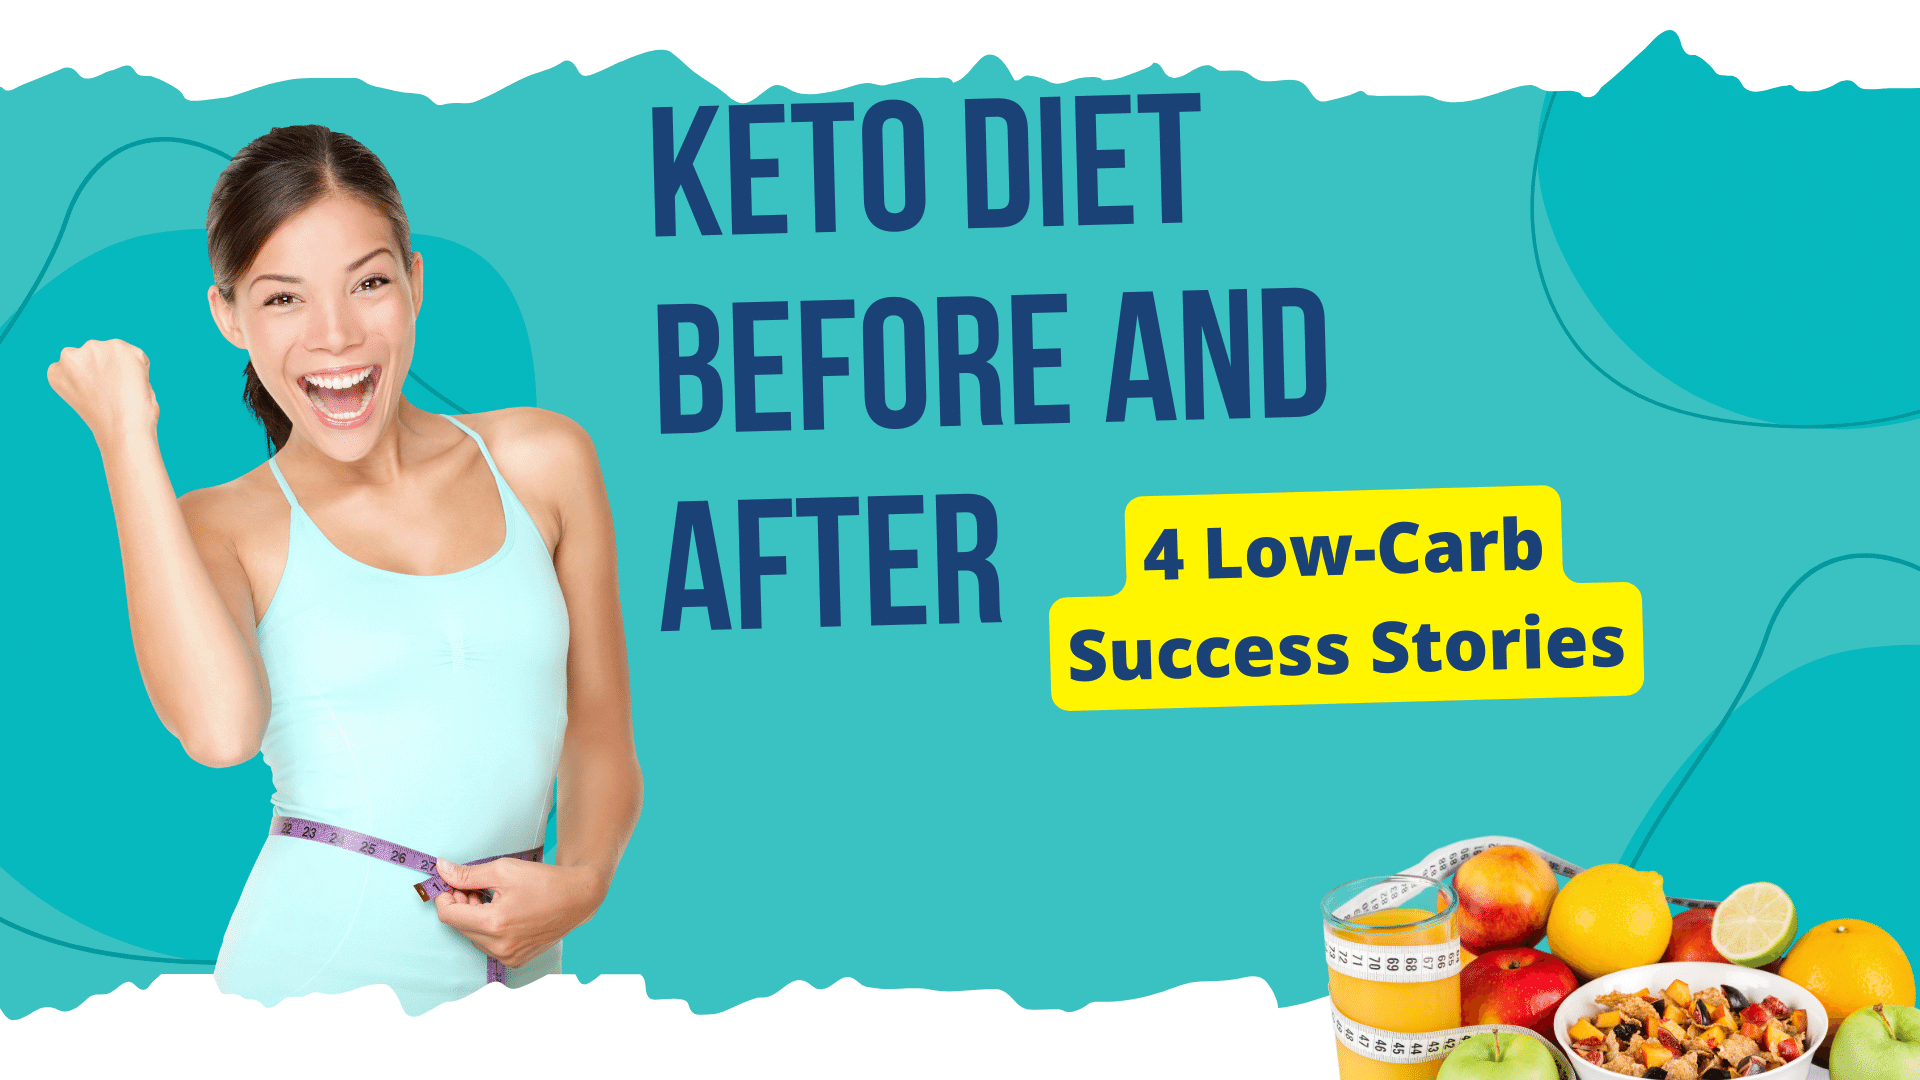 Keto Diet Before and After 4 LowCarb Success Stories Eat Healthy is